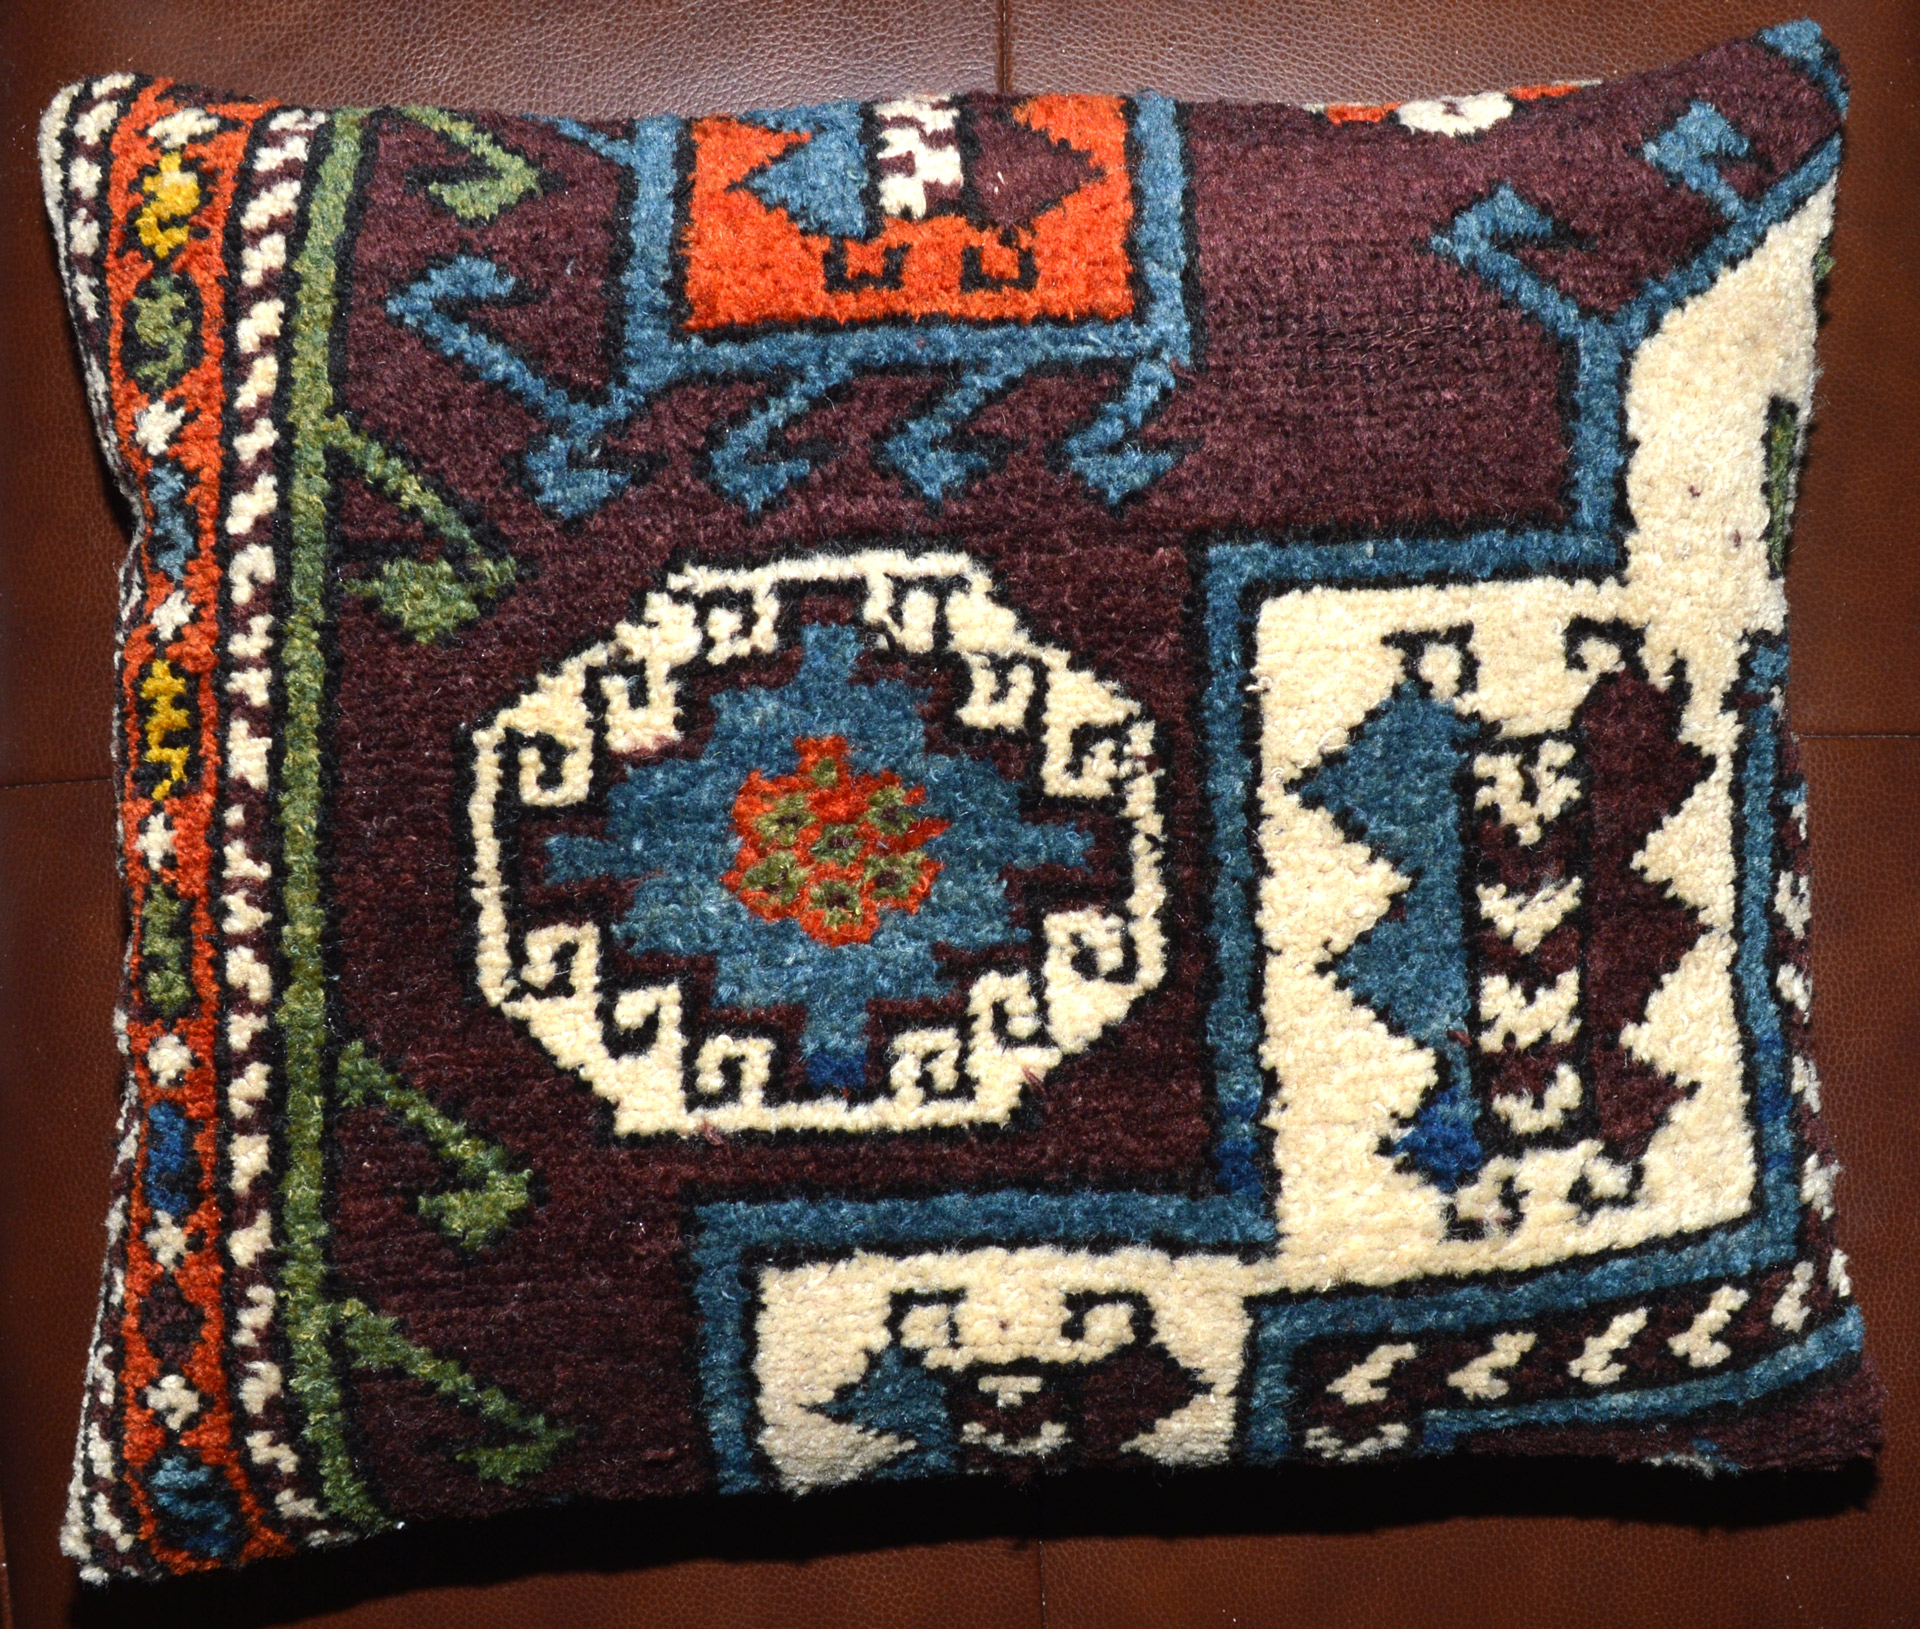 18" x 15" antique Oriental rug pillow made from a fragment of an antique Turkish rug and backed with navy blue velvet. Douglas Stock Gallery, Boston,MA area. We work with private clients, architects and interior designers. Antique rugs, room size carpets, runners, antique rug pillows.